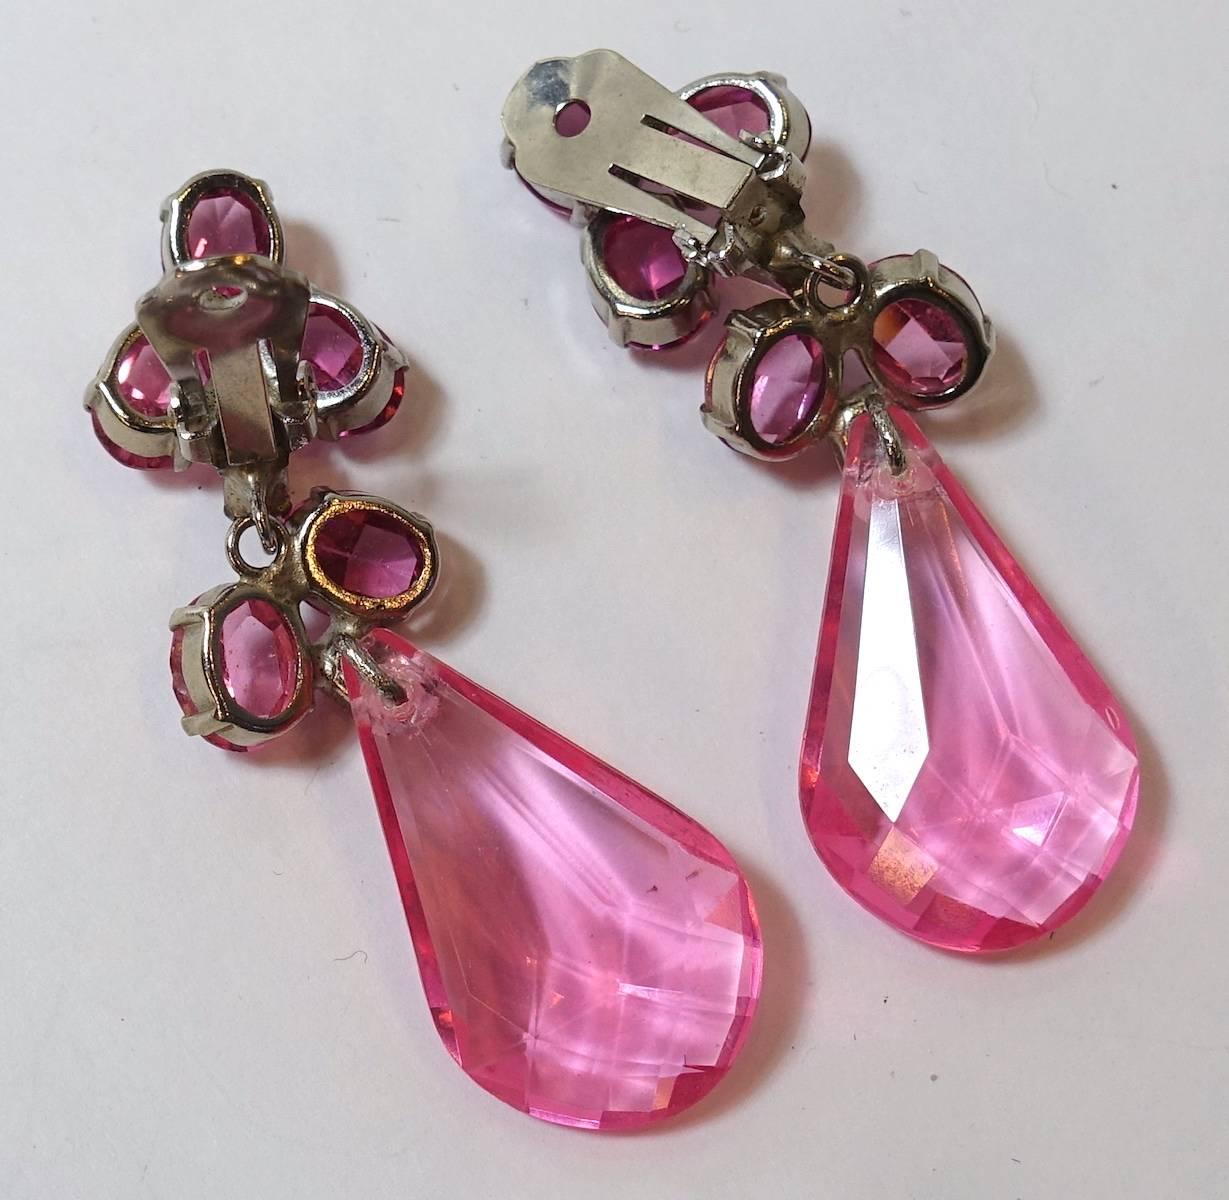 These vintage earrings feature a pink Lucite drop with pink crystal accents in a silver-plated base metal setting.  These clip earrings measure 2-3/4” x 3/4” and are in excellent condition.